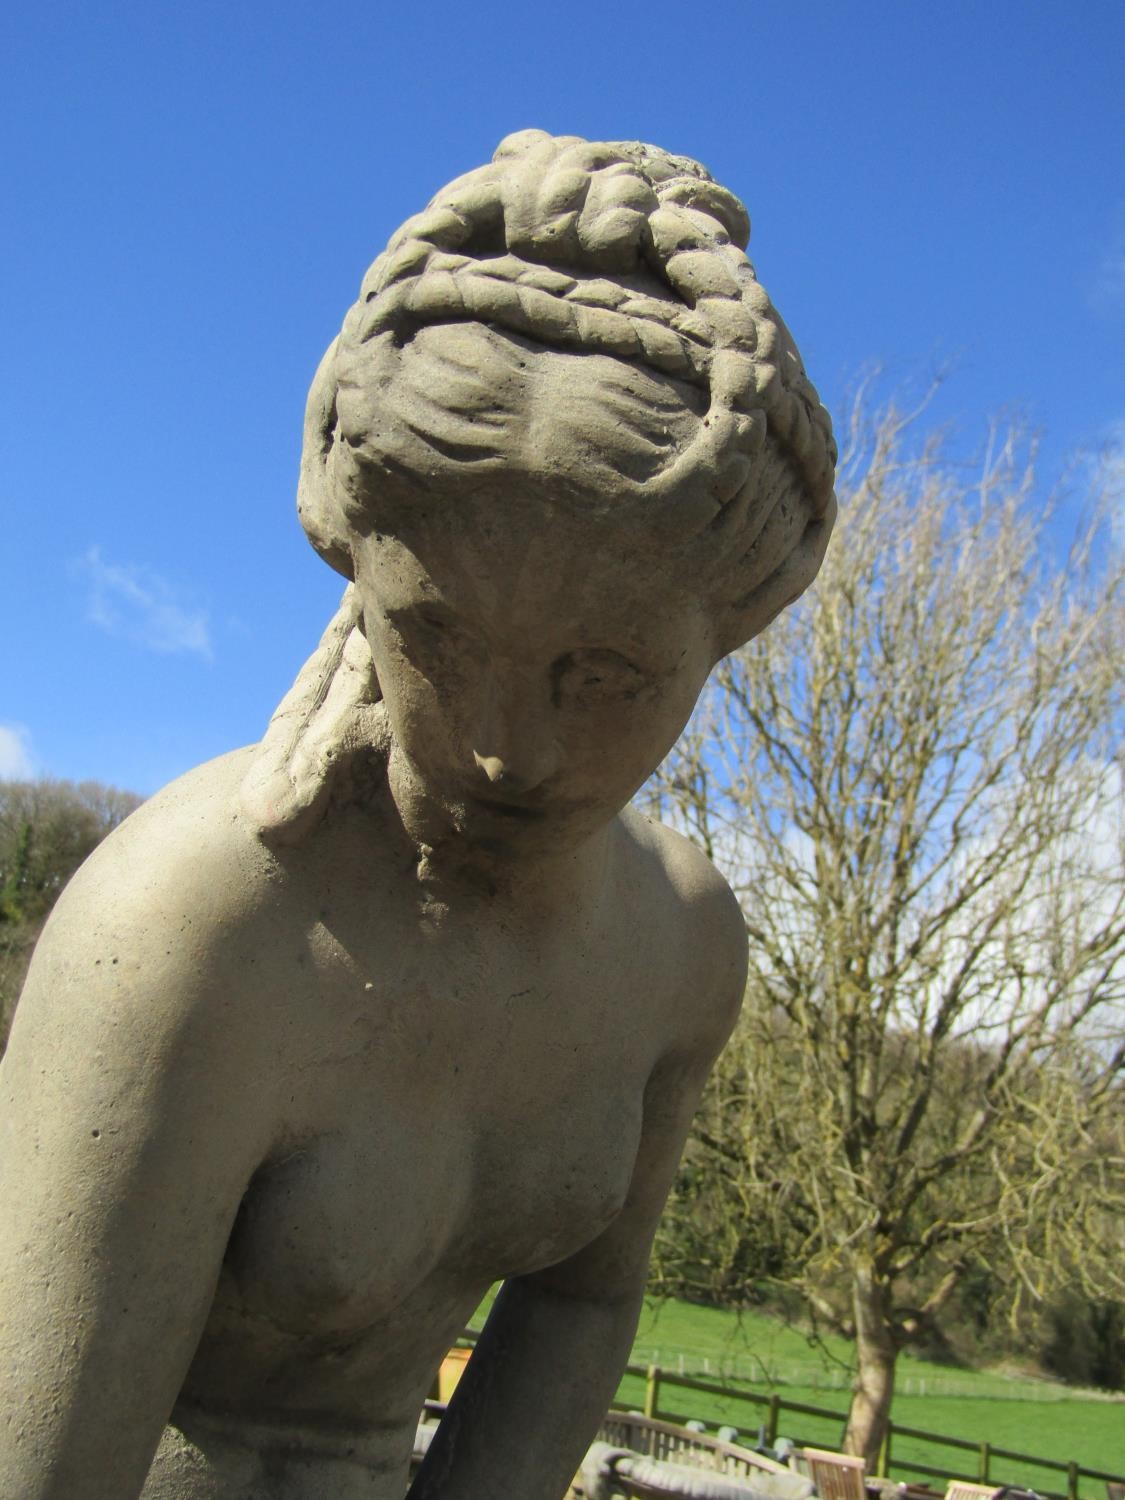 A cast composition stone garden ornament in the form a classical maiden 105 cm high - Image 5 of 5